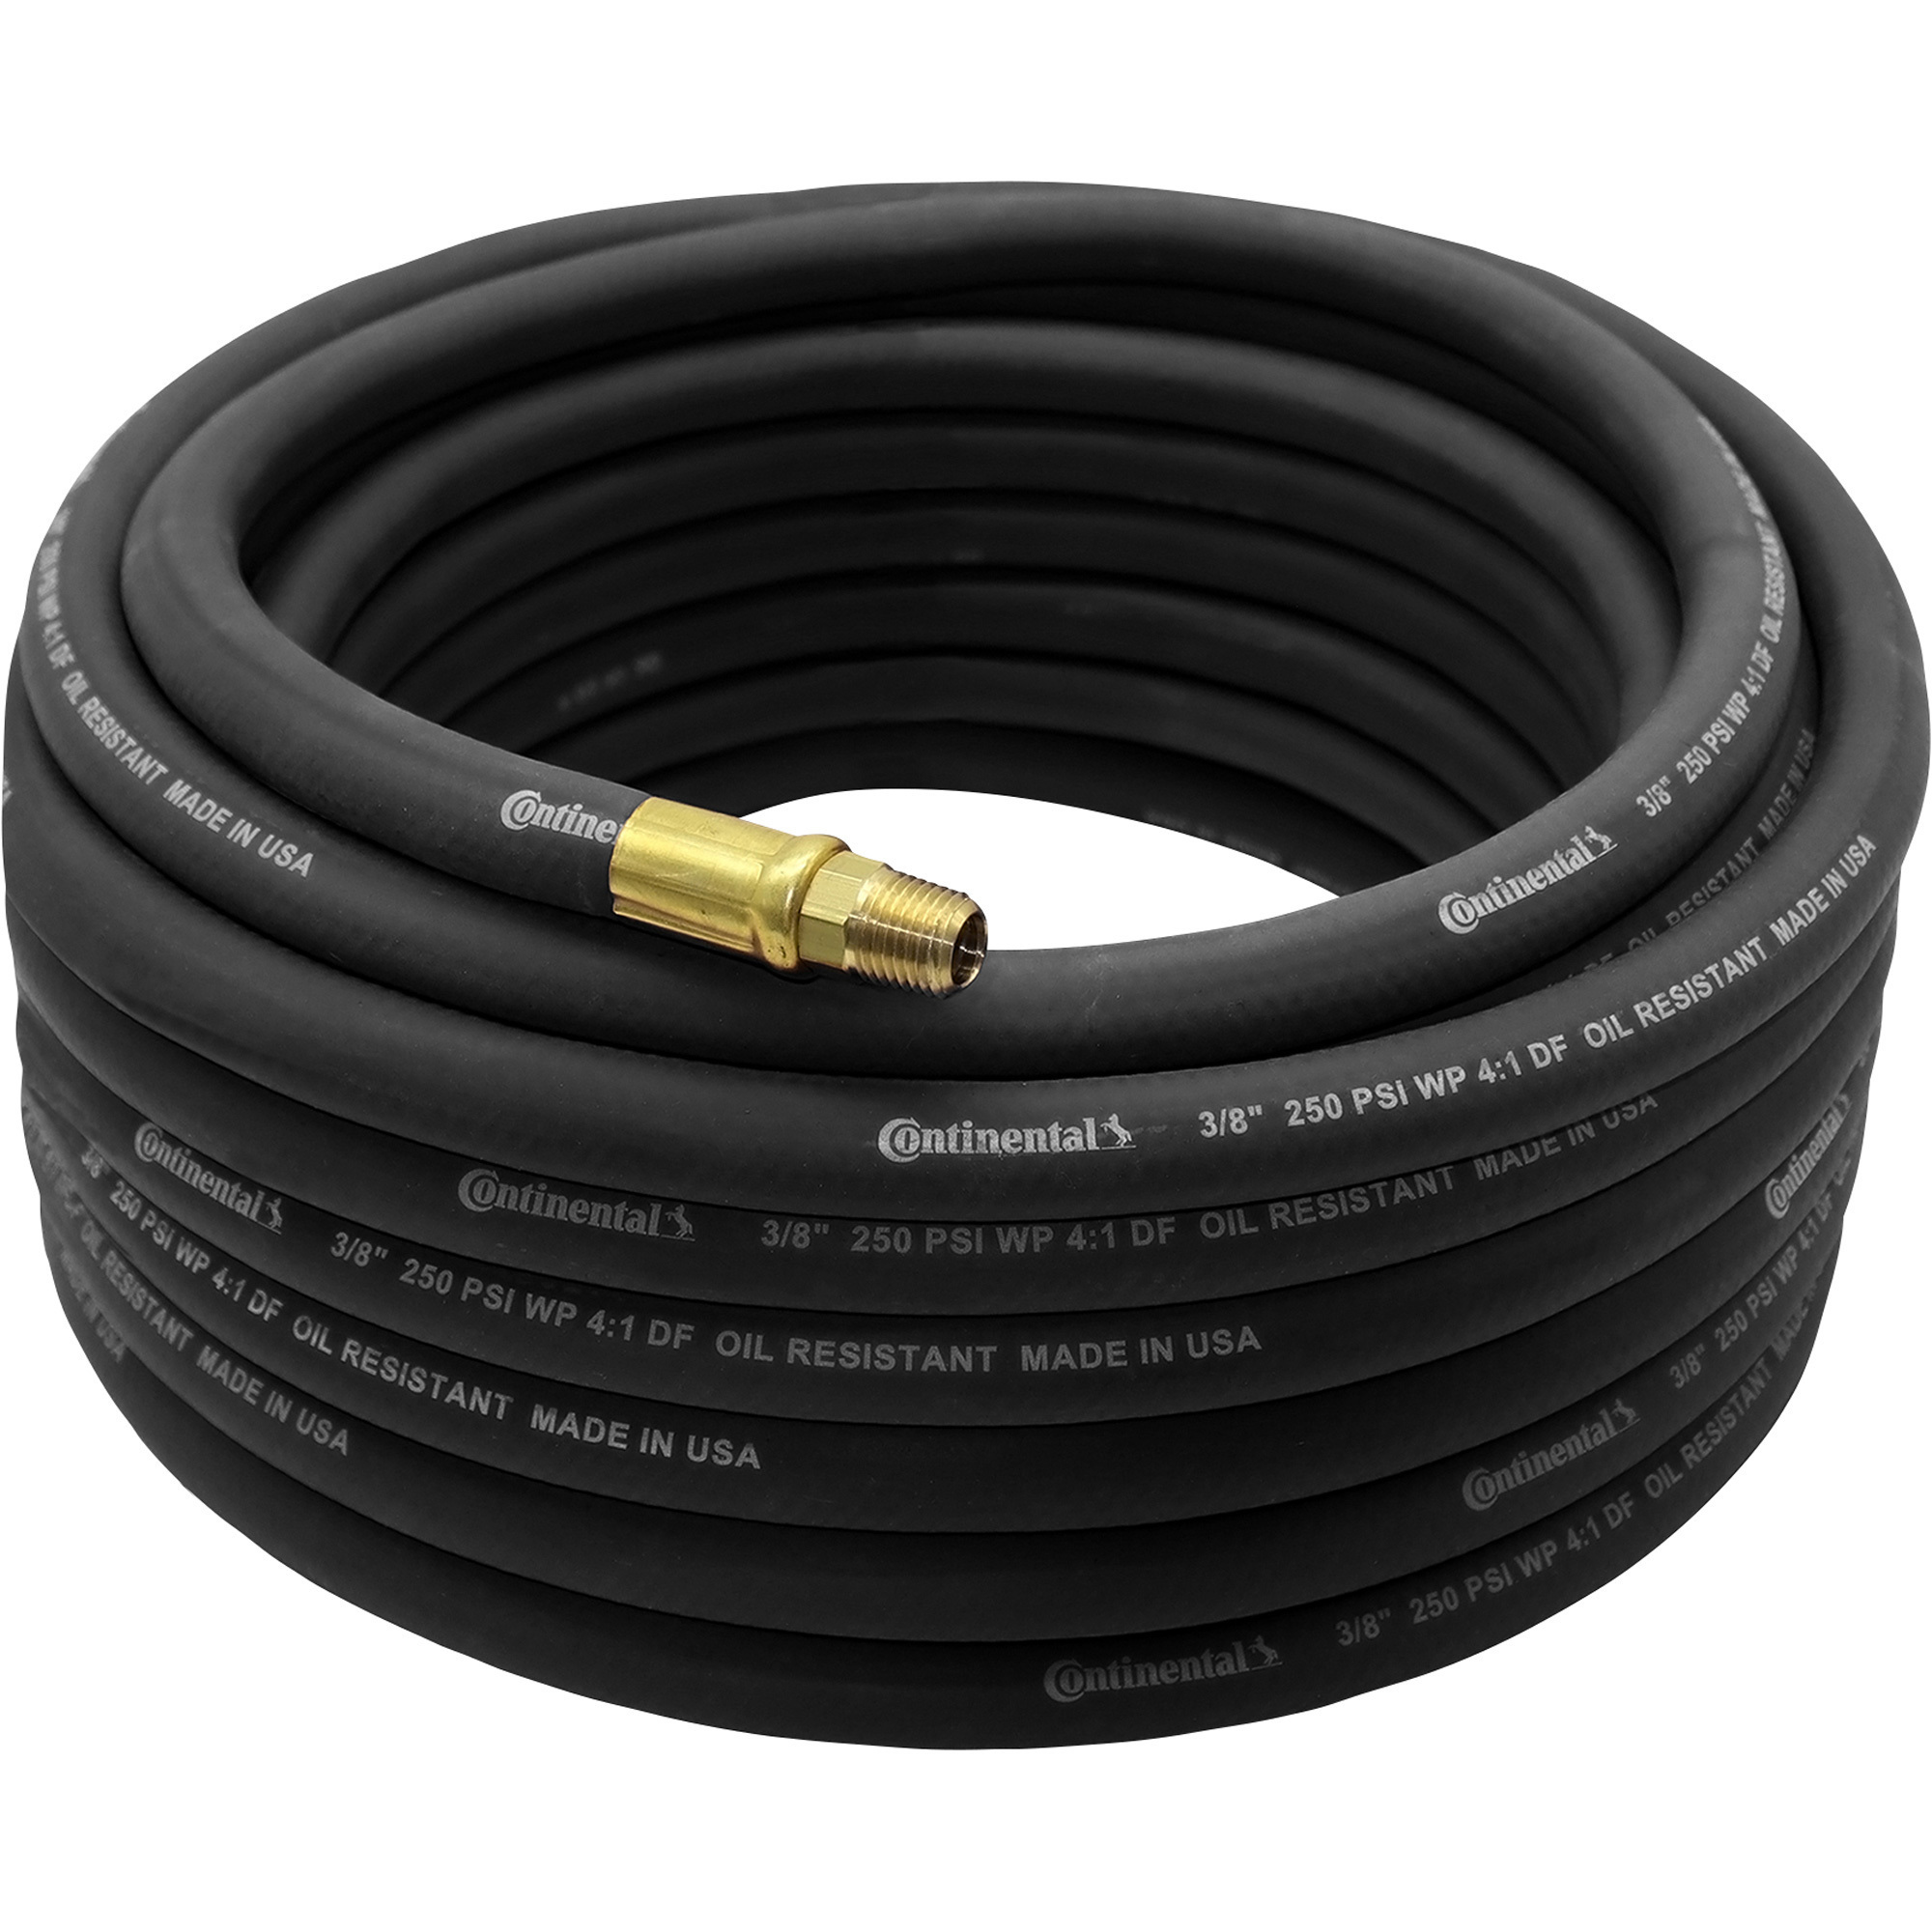 Condensation water outlet hose for all touring models all years of  manufacturing, you need 2 for 1 car